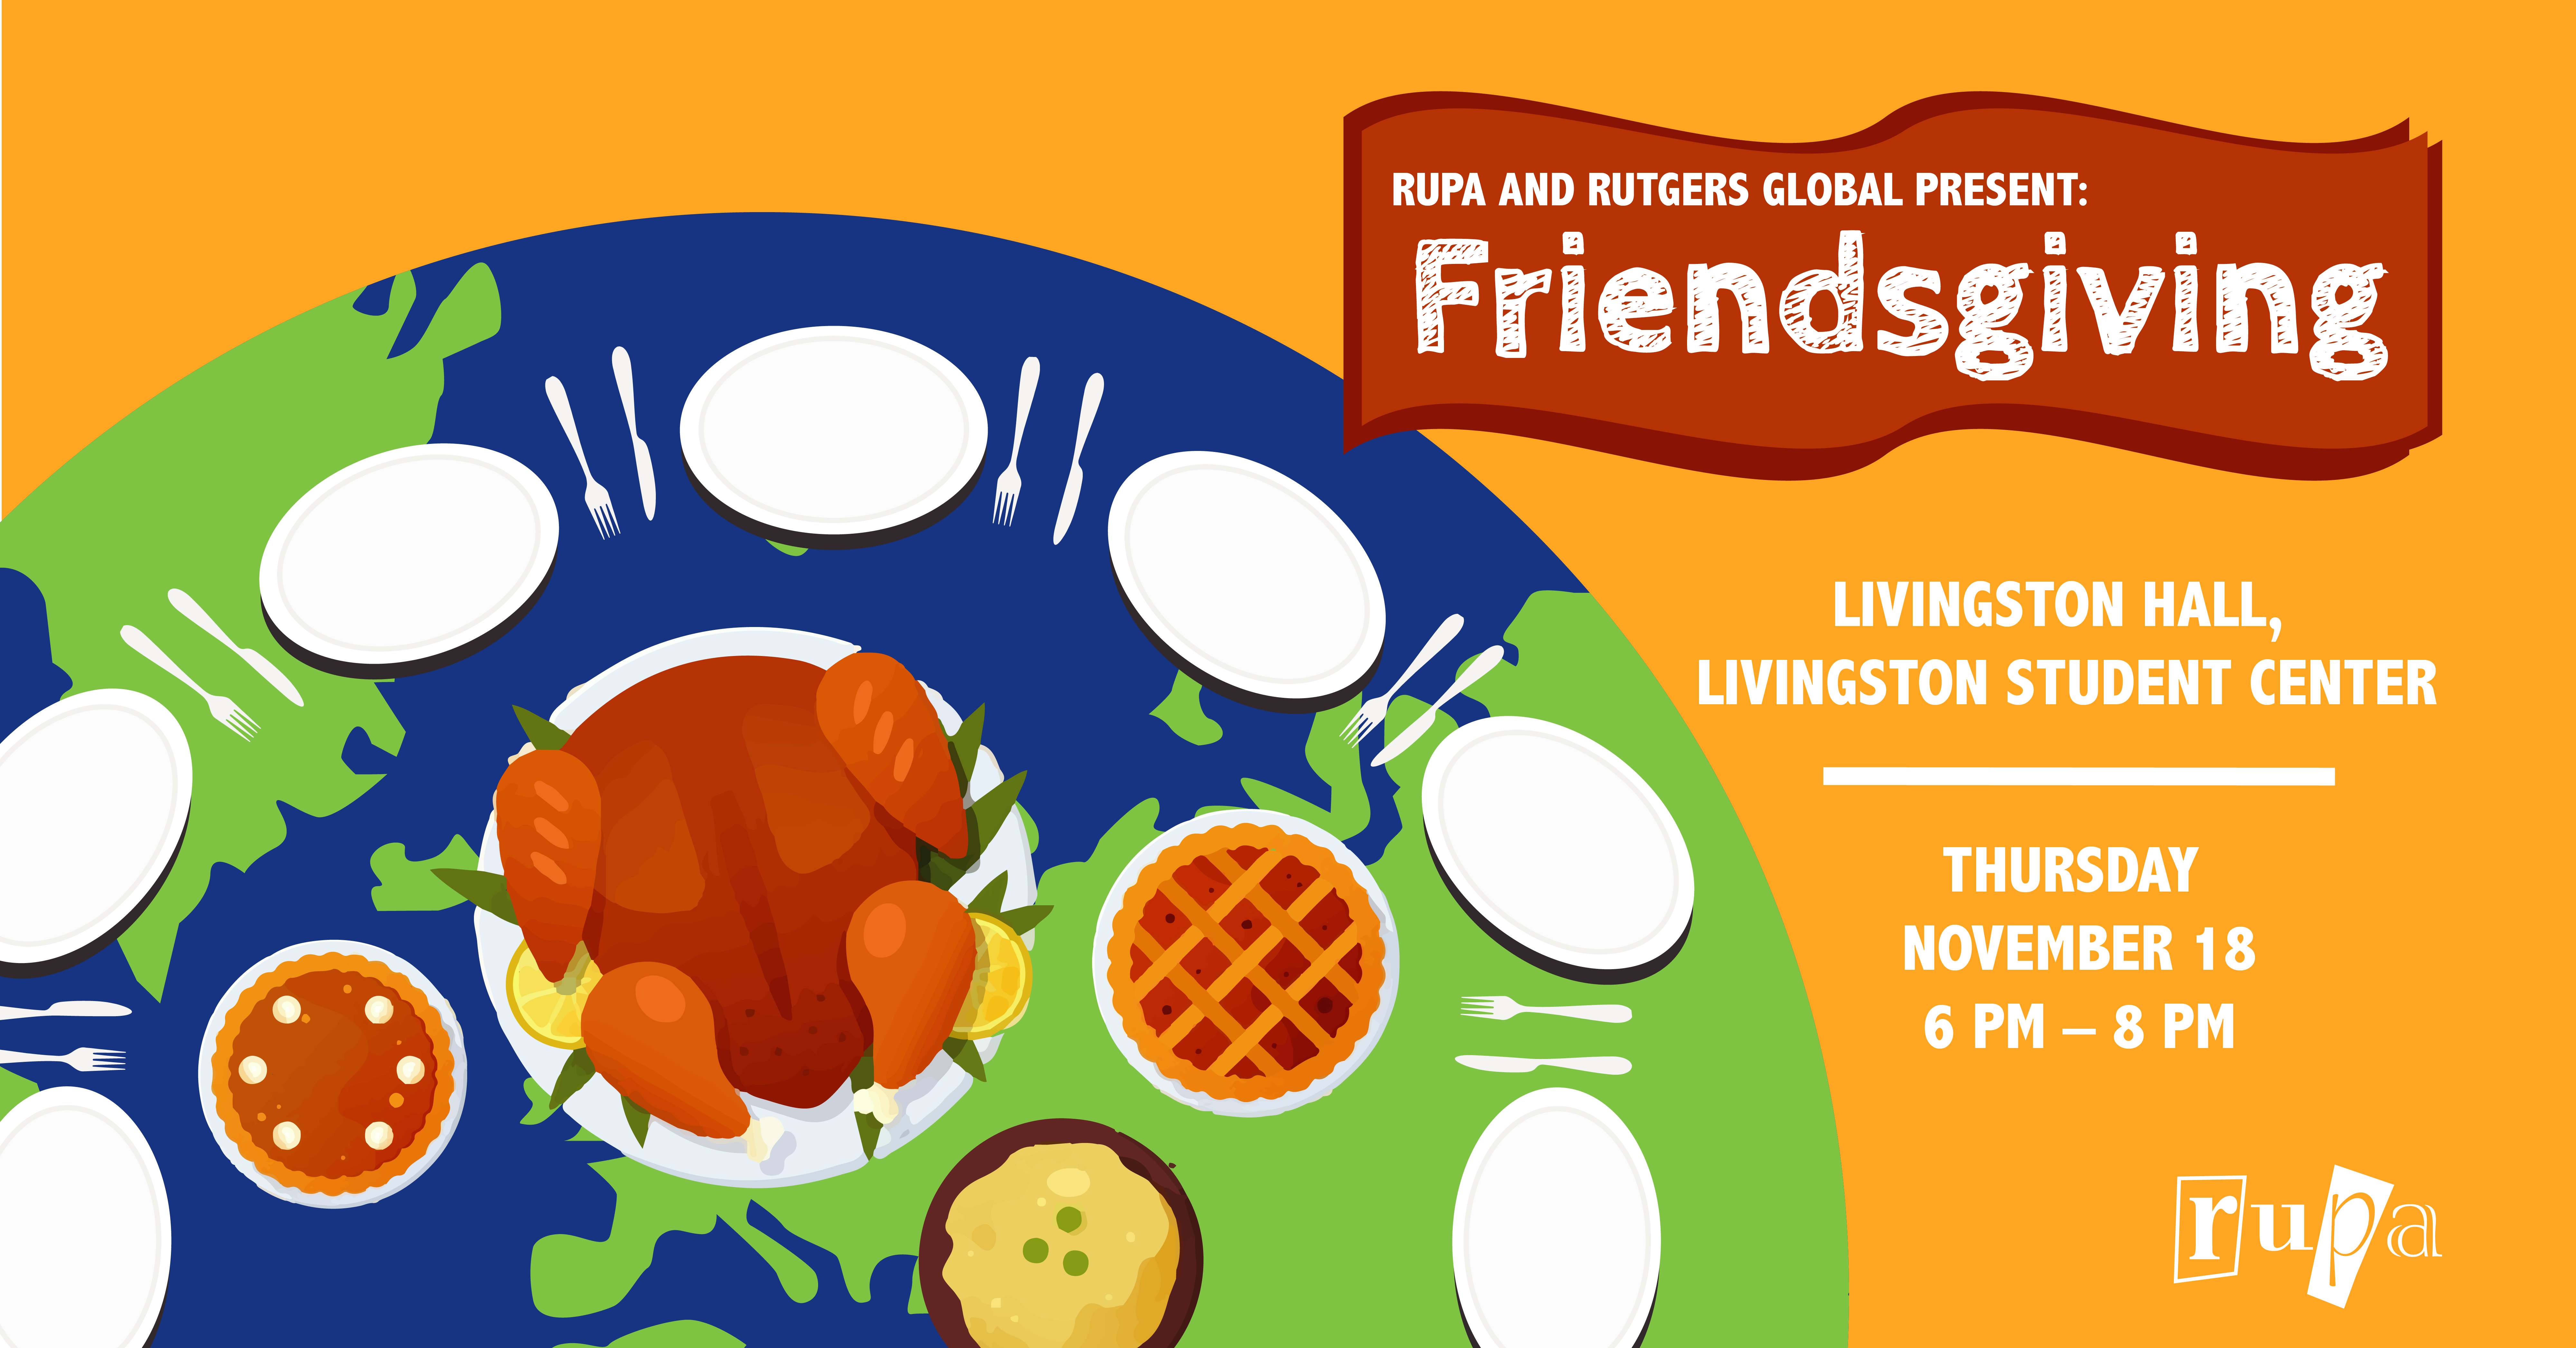 Illustration of globe with plates and Thanksgiving dishes with the text: "RUPA and Rutgers Global Present: Friendsgiving"